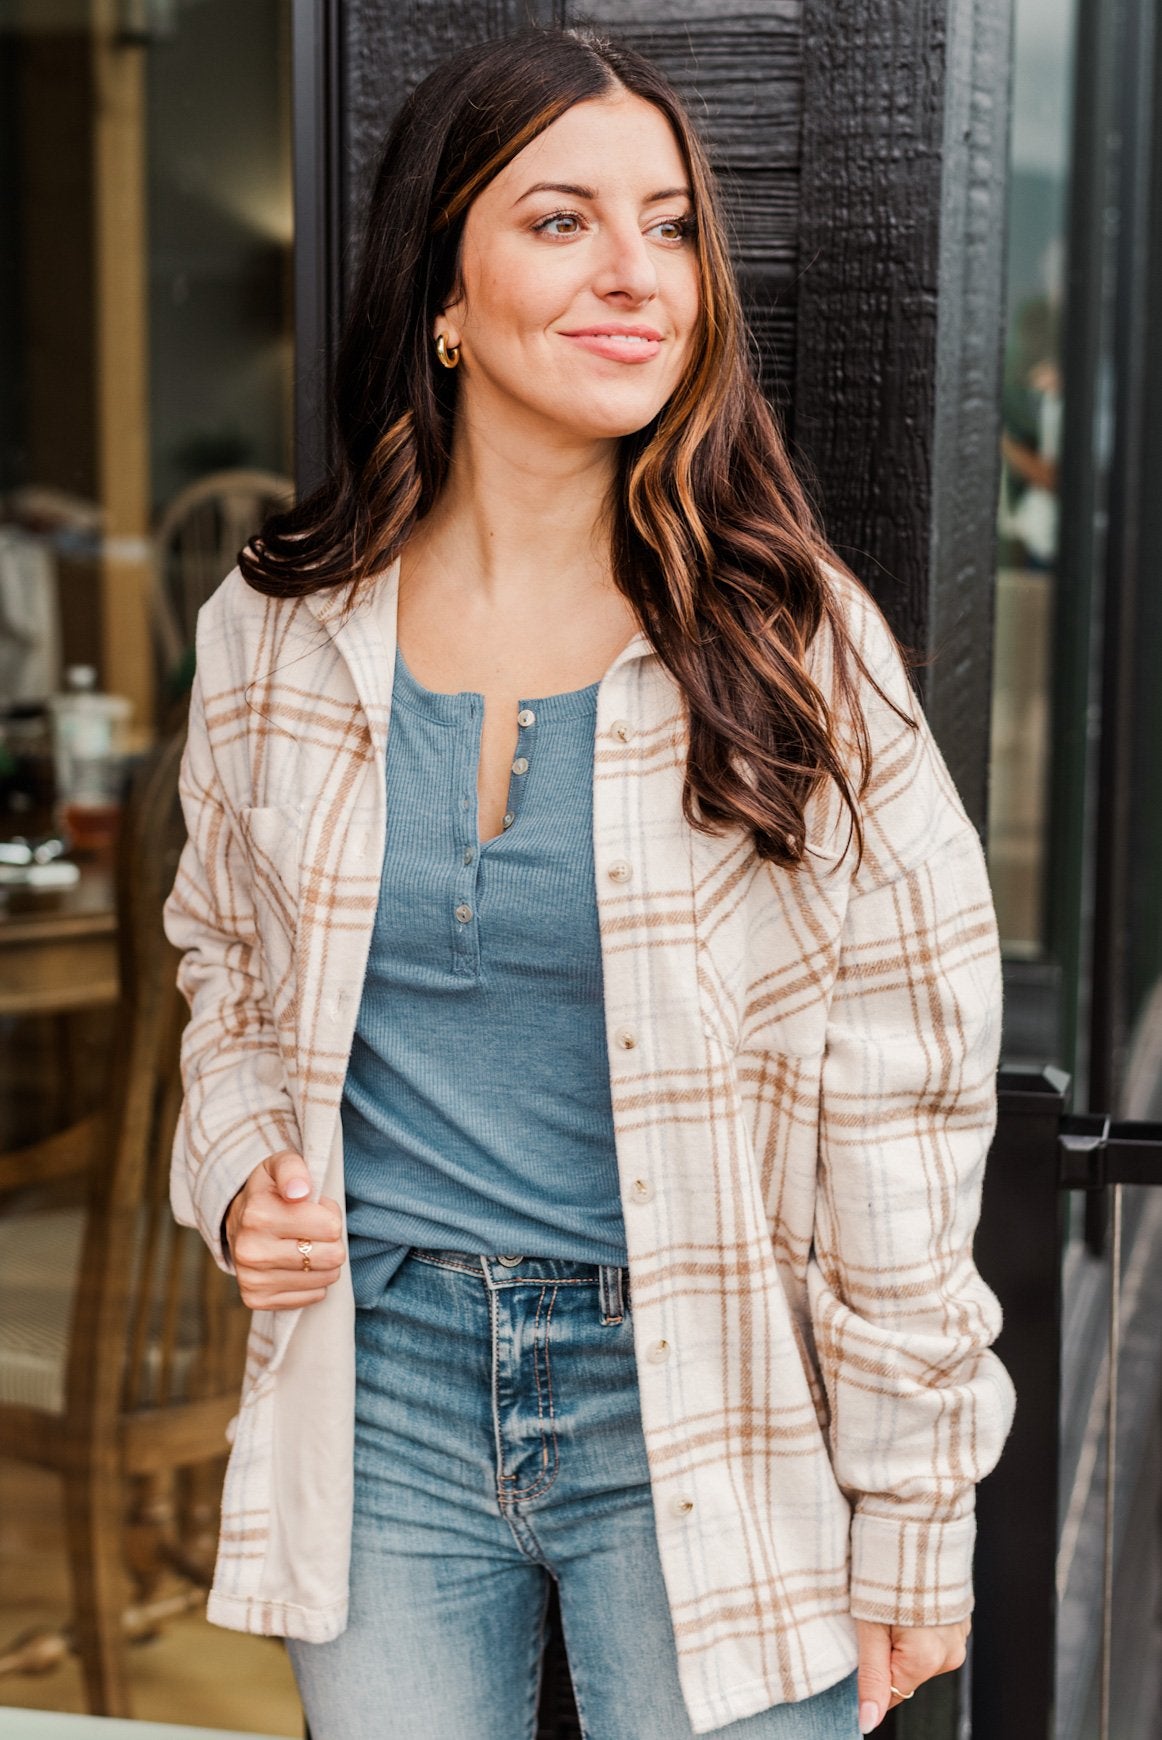 Happiest Of All Plaid Jacket- Cream & Taupe